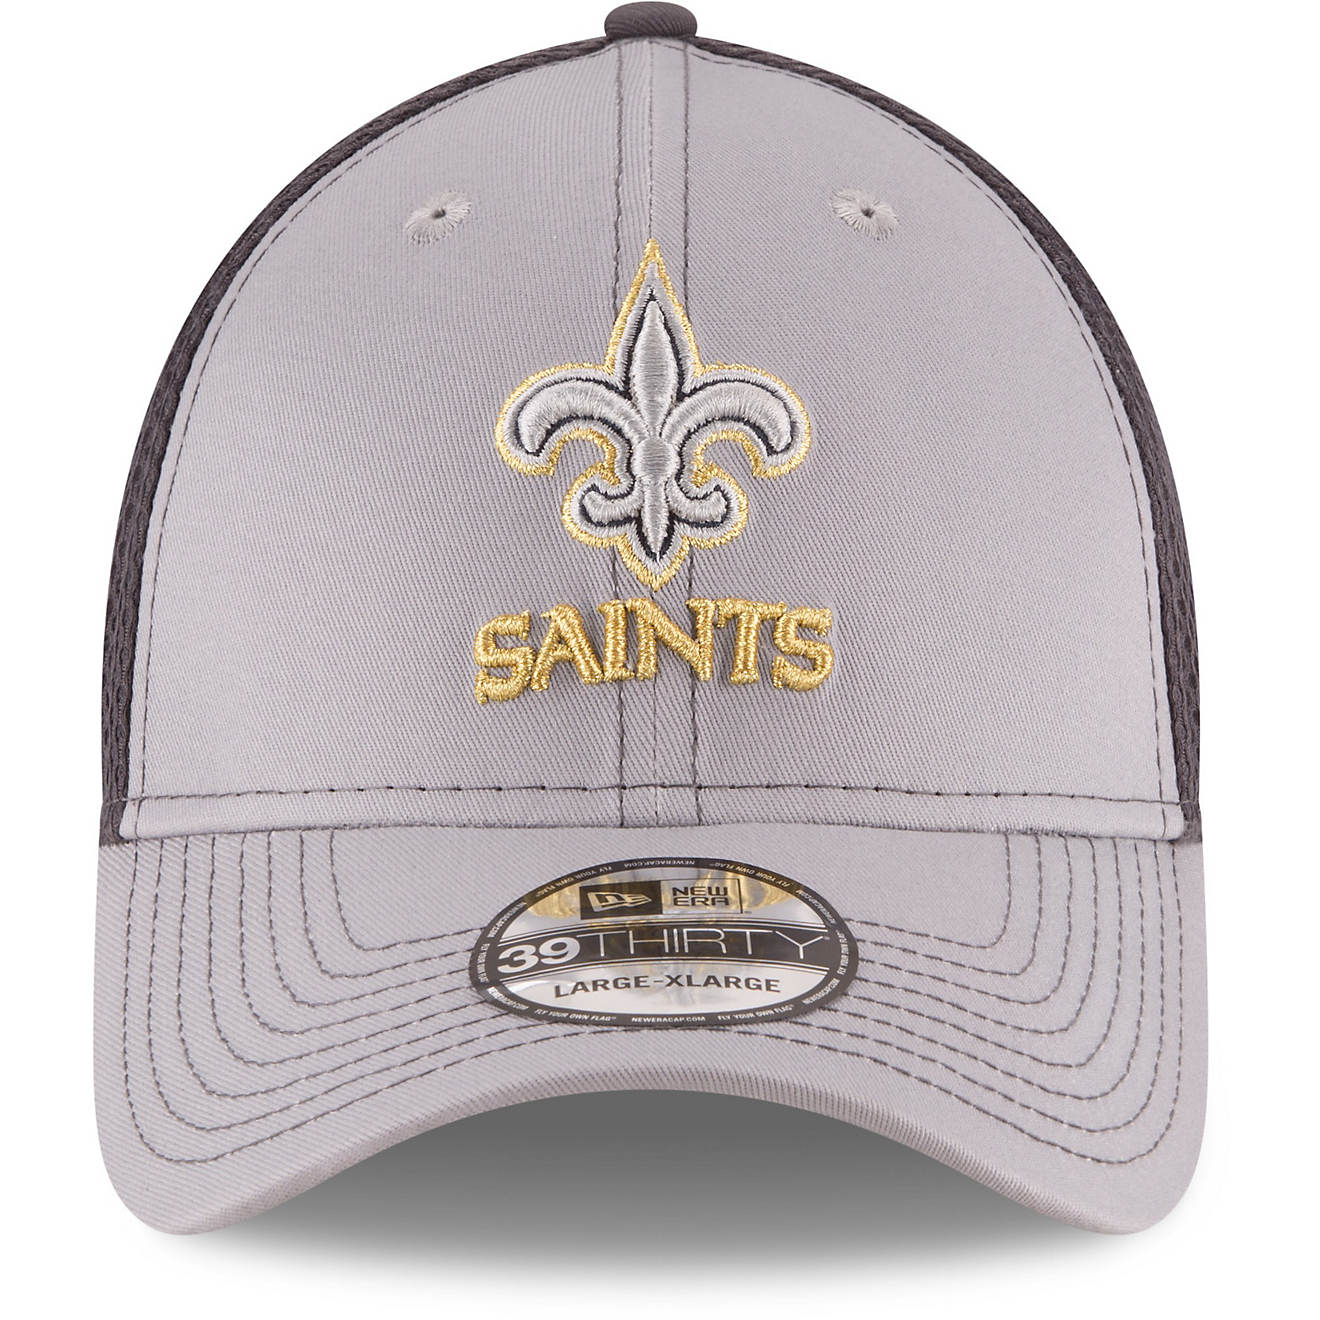 New Era Men's New Orleans Saints 39THIRTY Grayed Out Cap                                                                         - view number 1